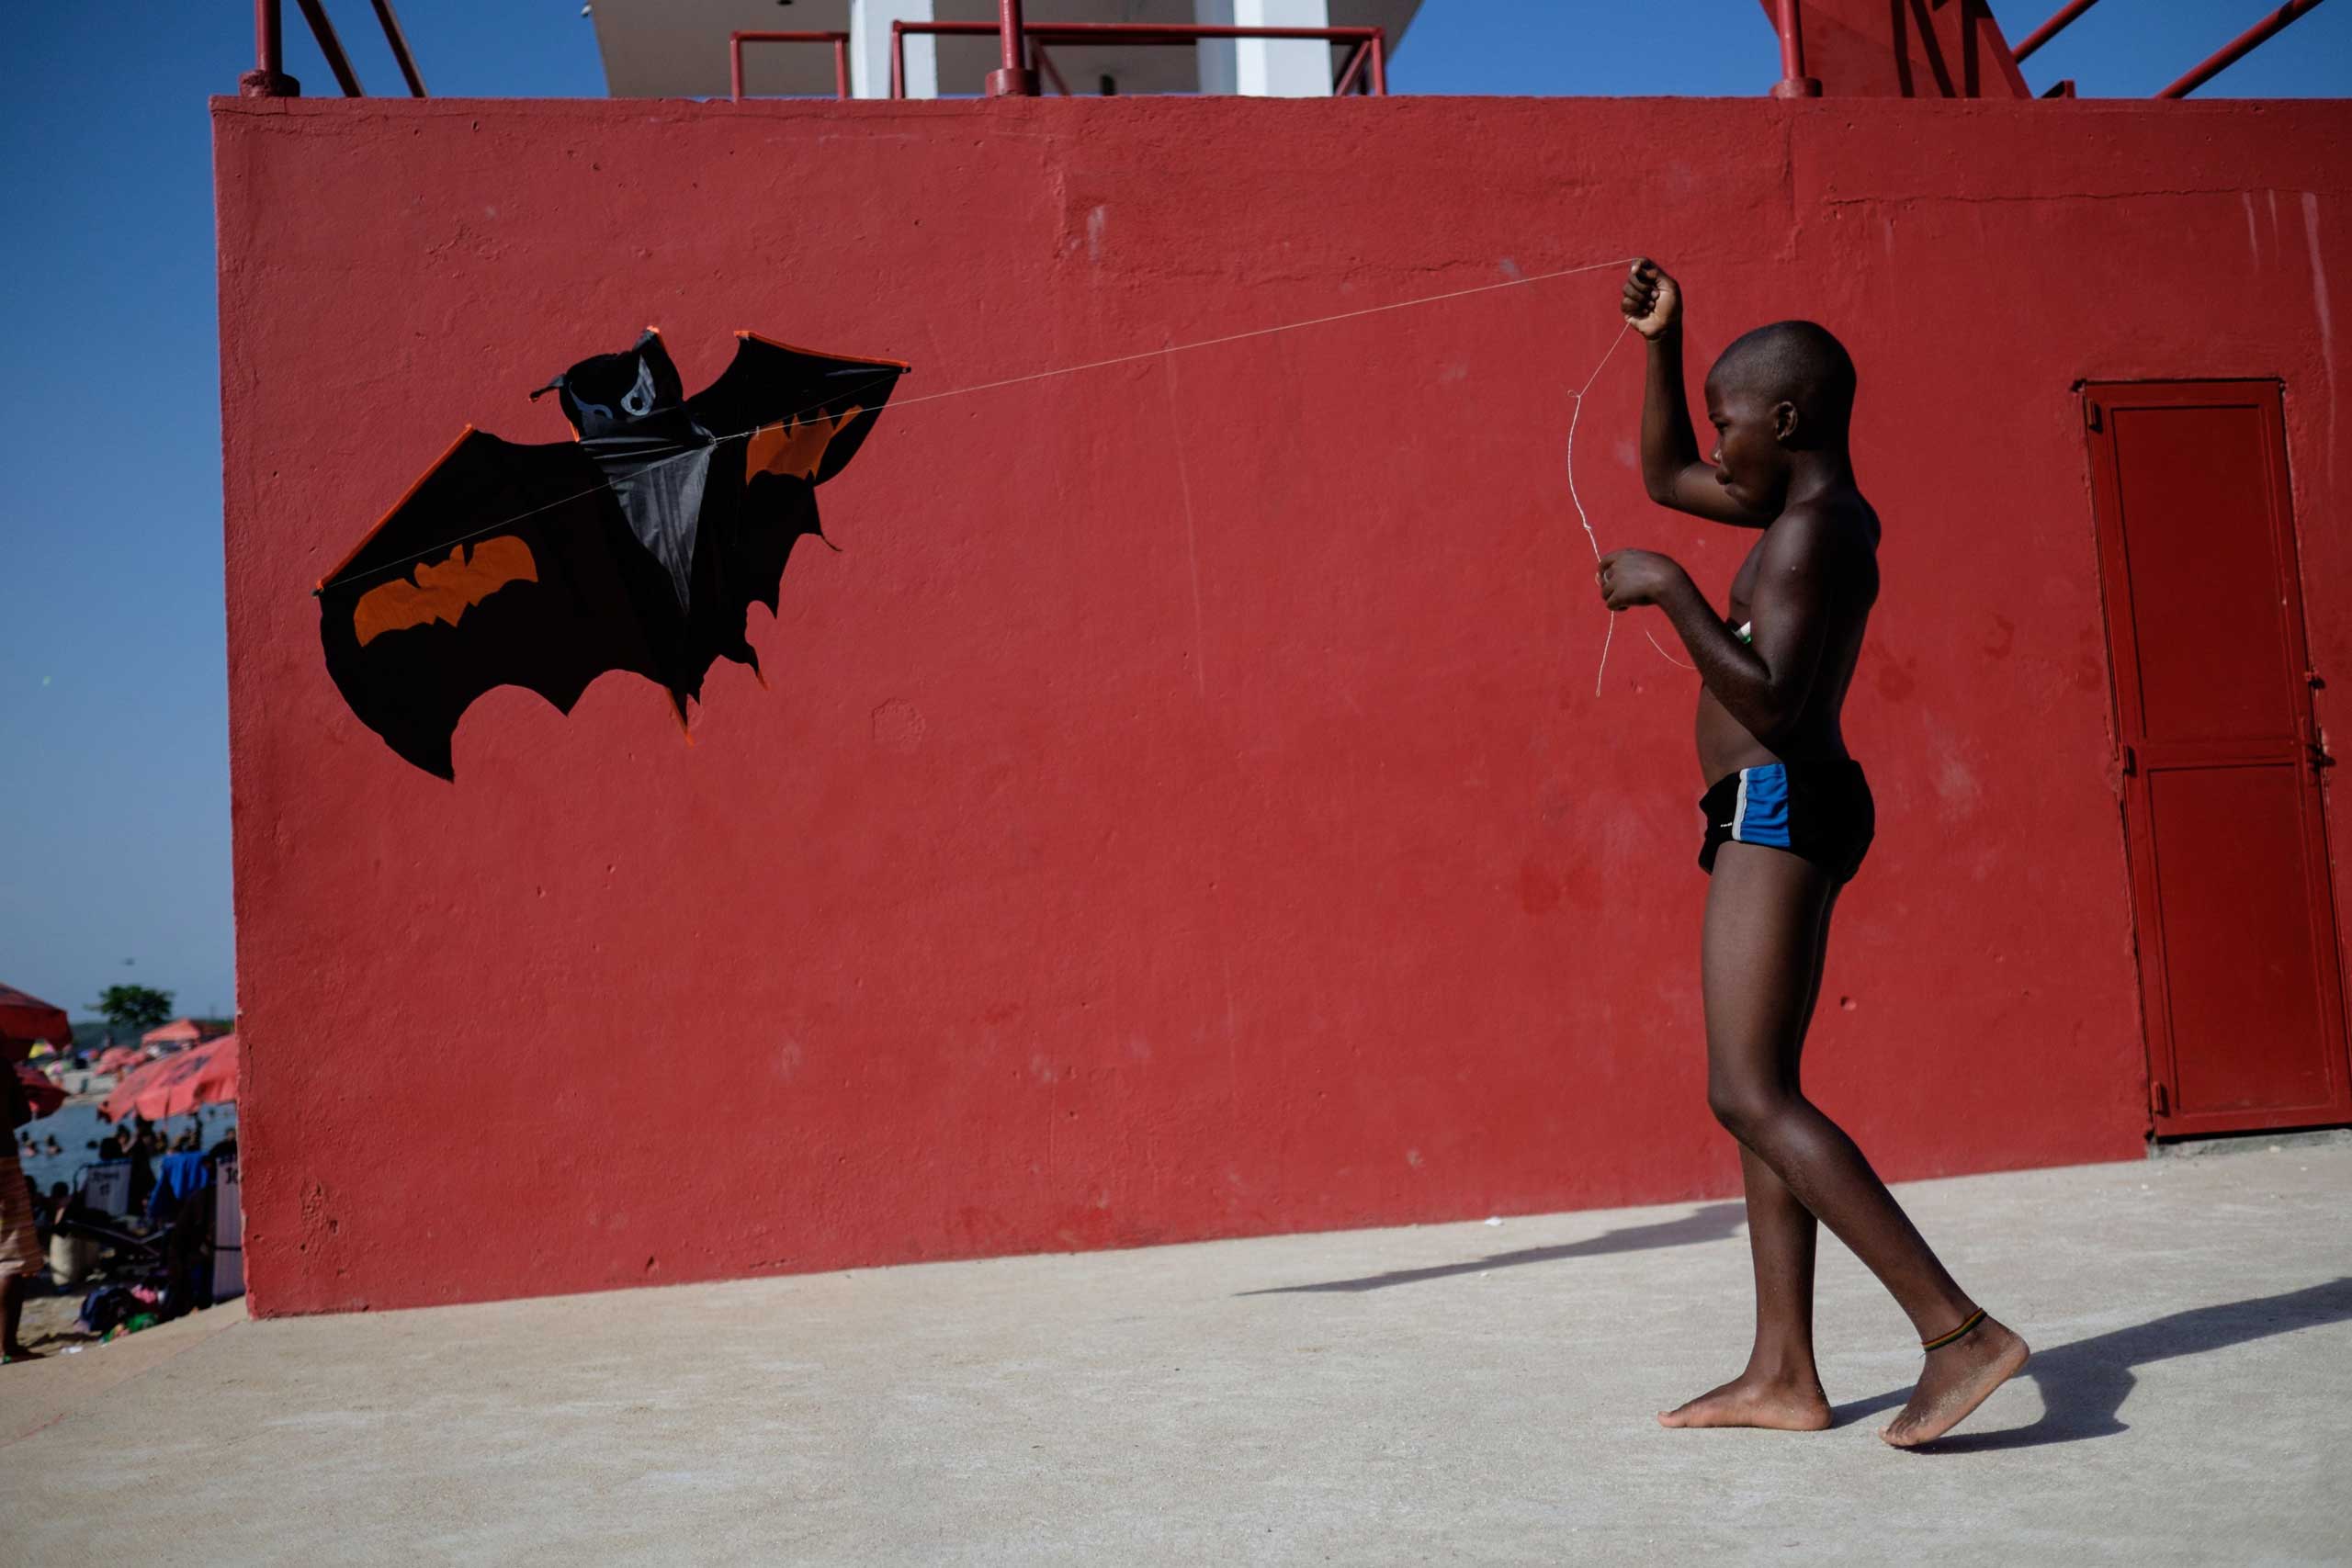 Jan. 19, 2015. A boy plays with a kite at the Ramos Pool as temperatures reached 113 Fahrenheit in Rio de Janeiro. The Ramos Pool, inaugurated in 2001, is an artificial beach associated to a public salt pool which filters the polluted seawater from the Guanabara bay located next to it.